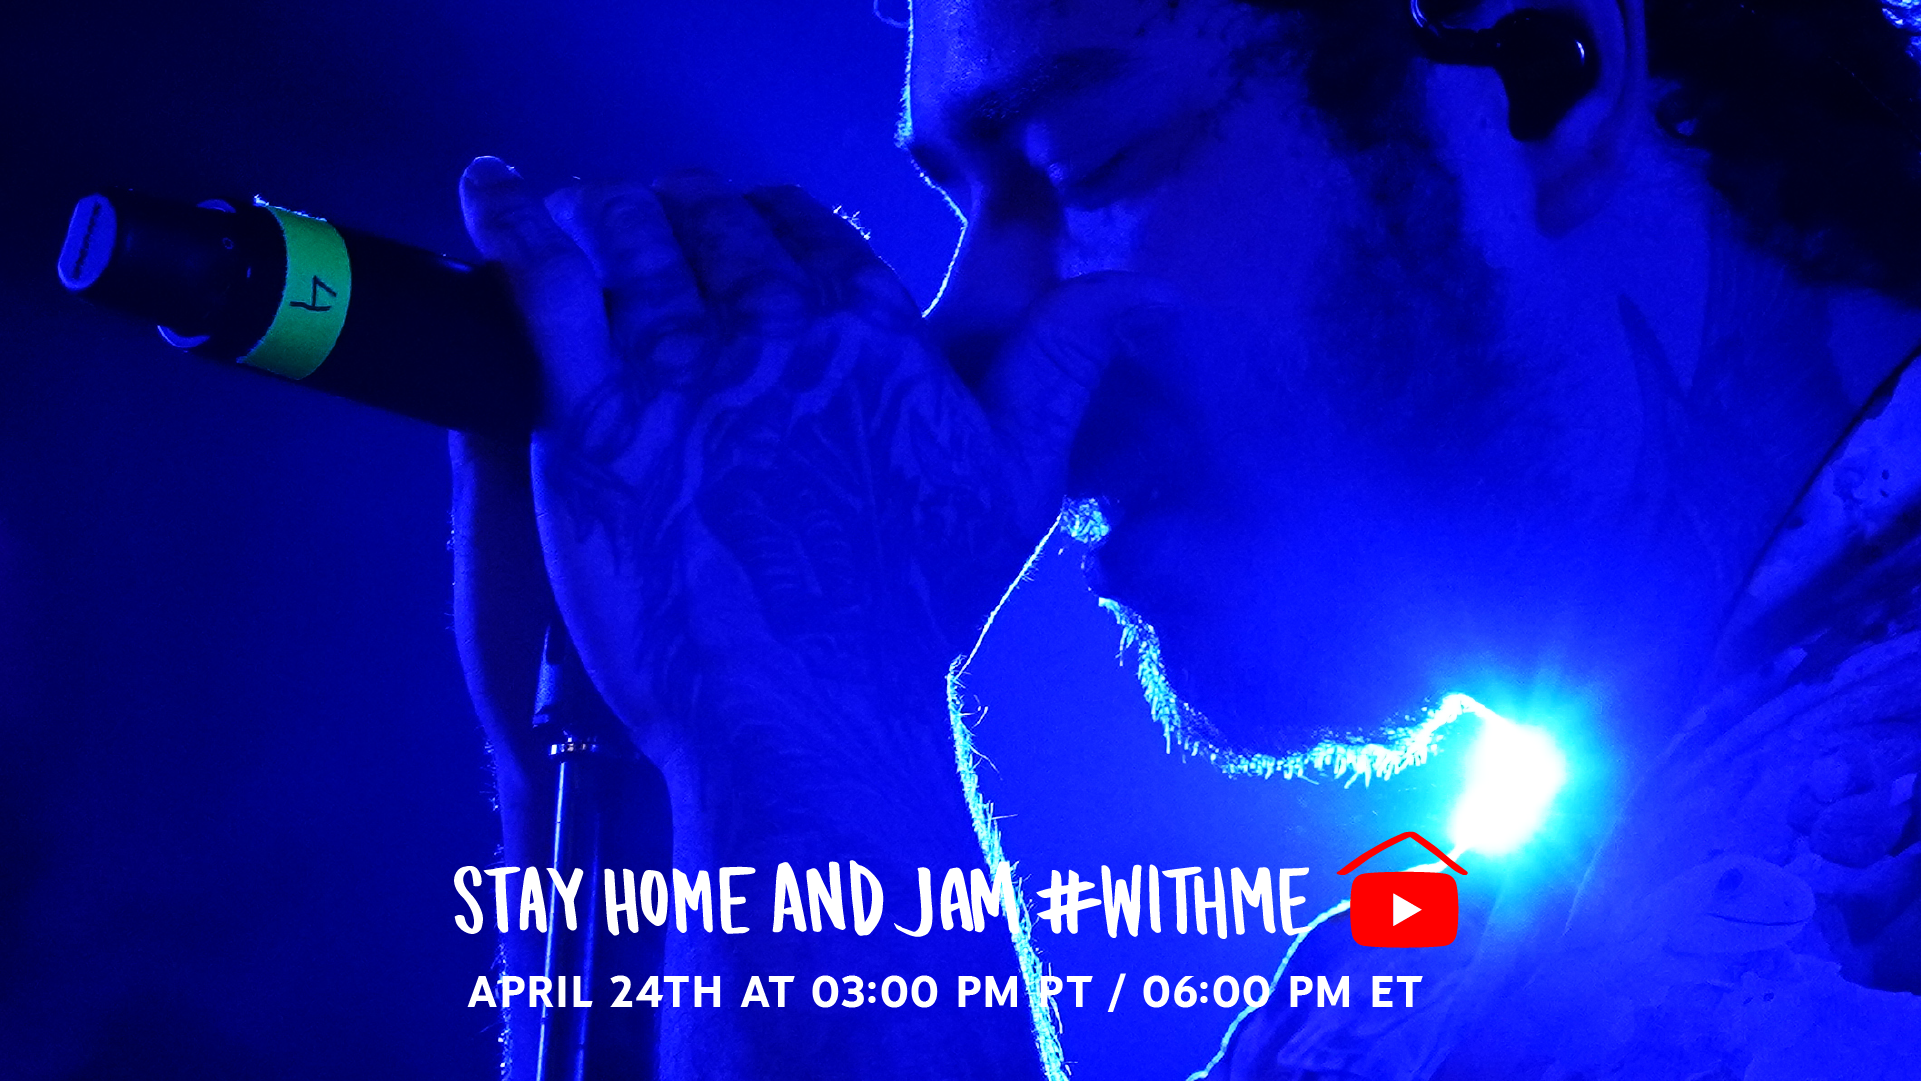 POST MALONE TO PERFORM NIRVANA-INSPIRED CONCERT VIA EXCLUSIVE YOUTUBE LIVESTREAM FRIDAY, APRIL 24th